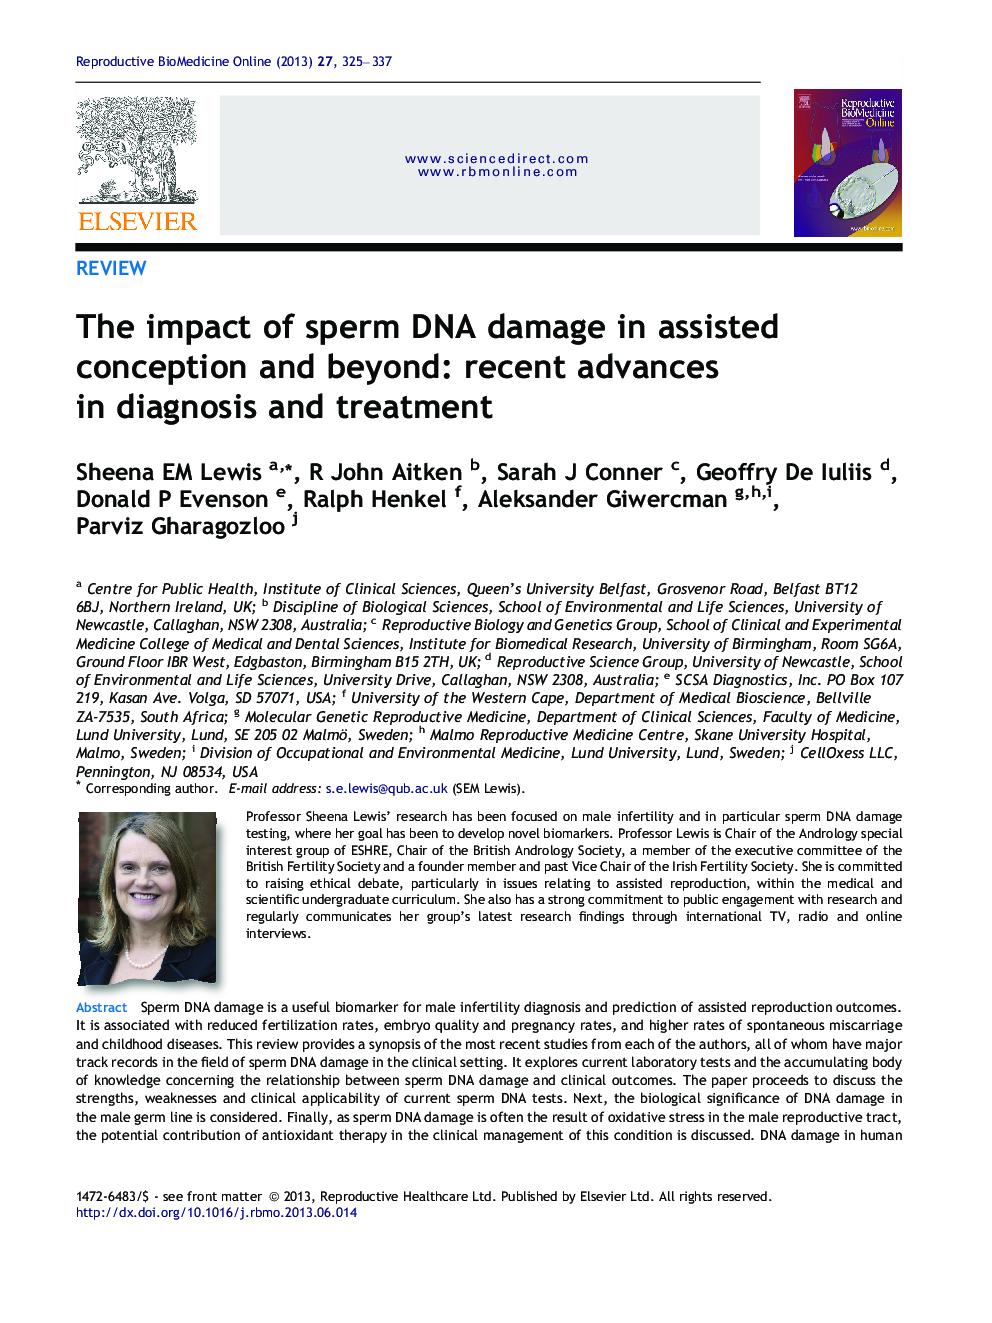 The impact of sperm DNA damage in assisted conception and beyond: recent advances in diagnosis and treatment 